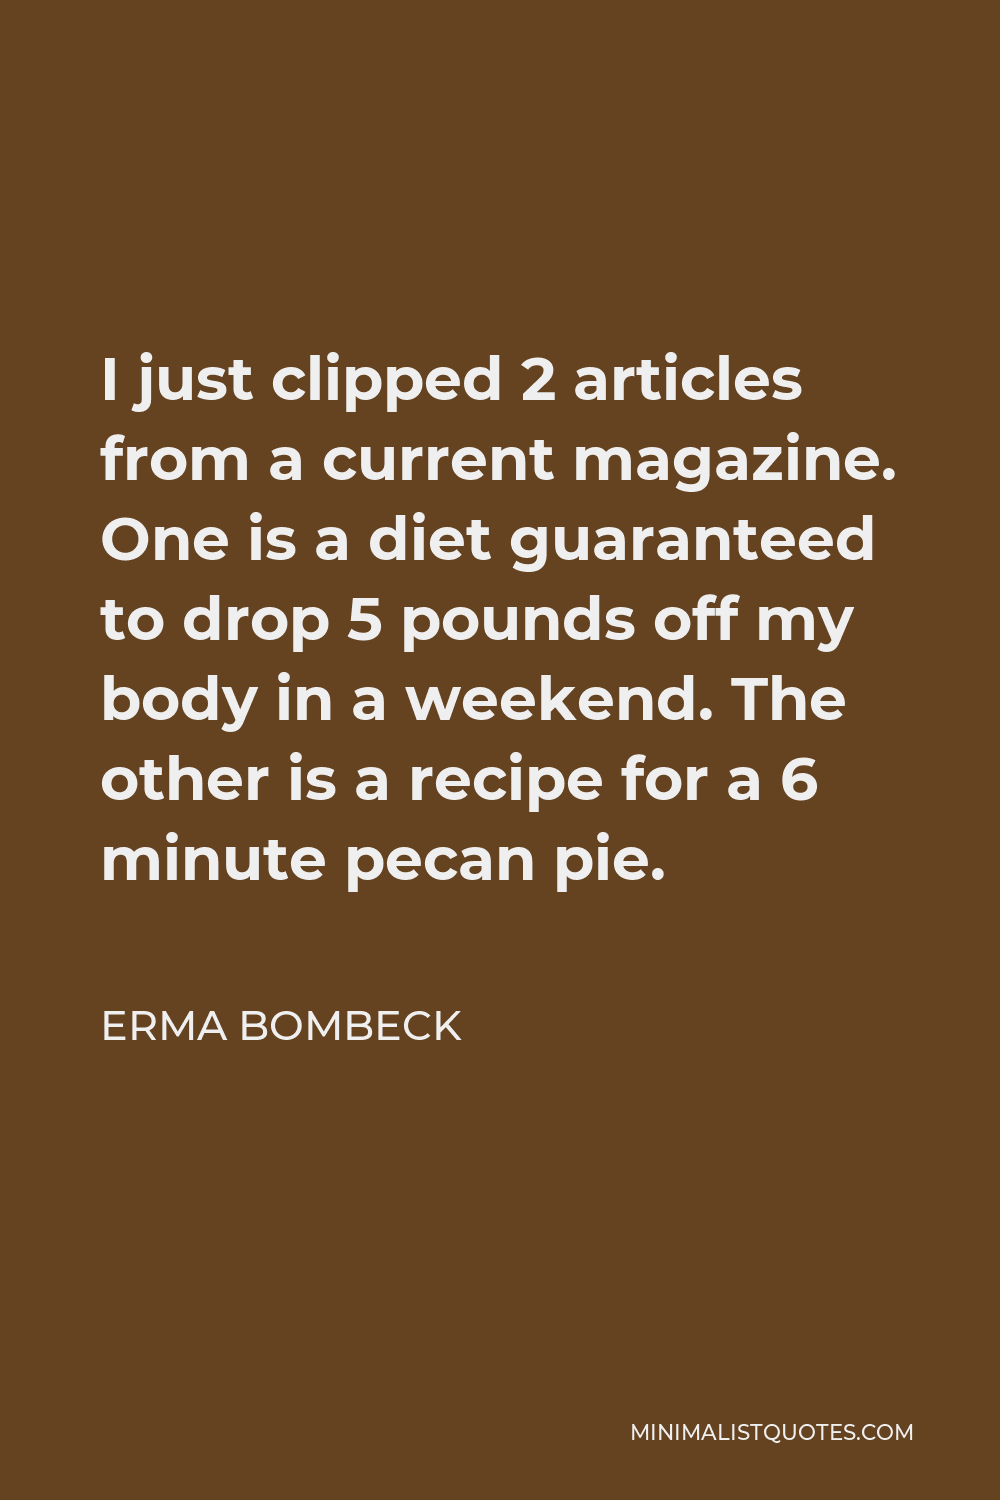 Erma Bombeck Quote - I just clipped 2 articles from a current magazine. One is a diet guaranteed to drop 5 pounds off my body in a weekend. The other is a recipe for a 6 minute pecan pie.